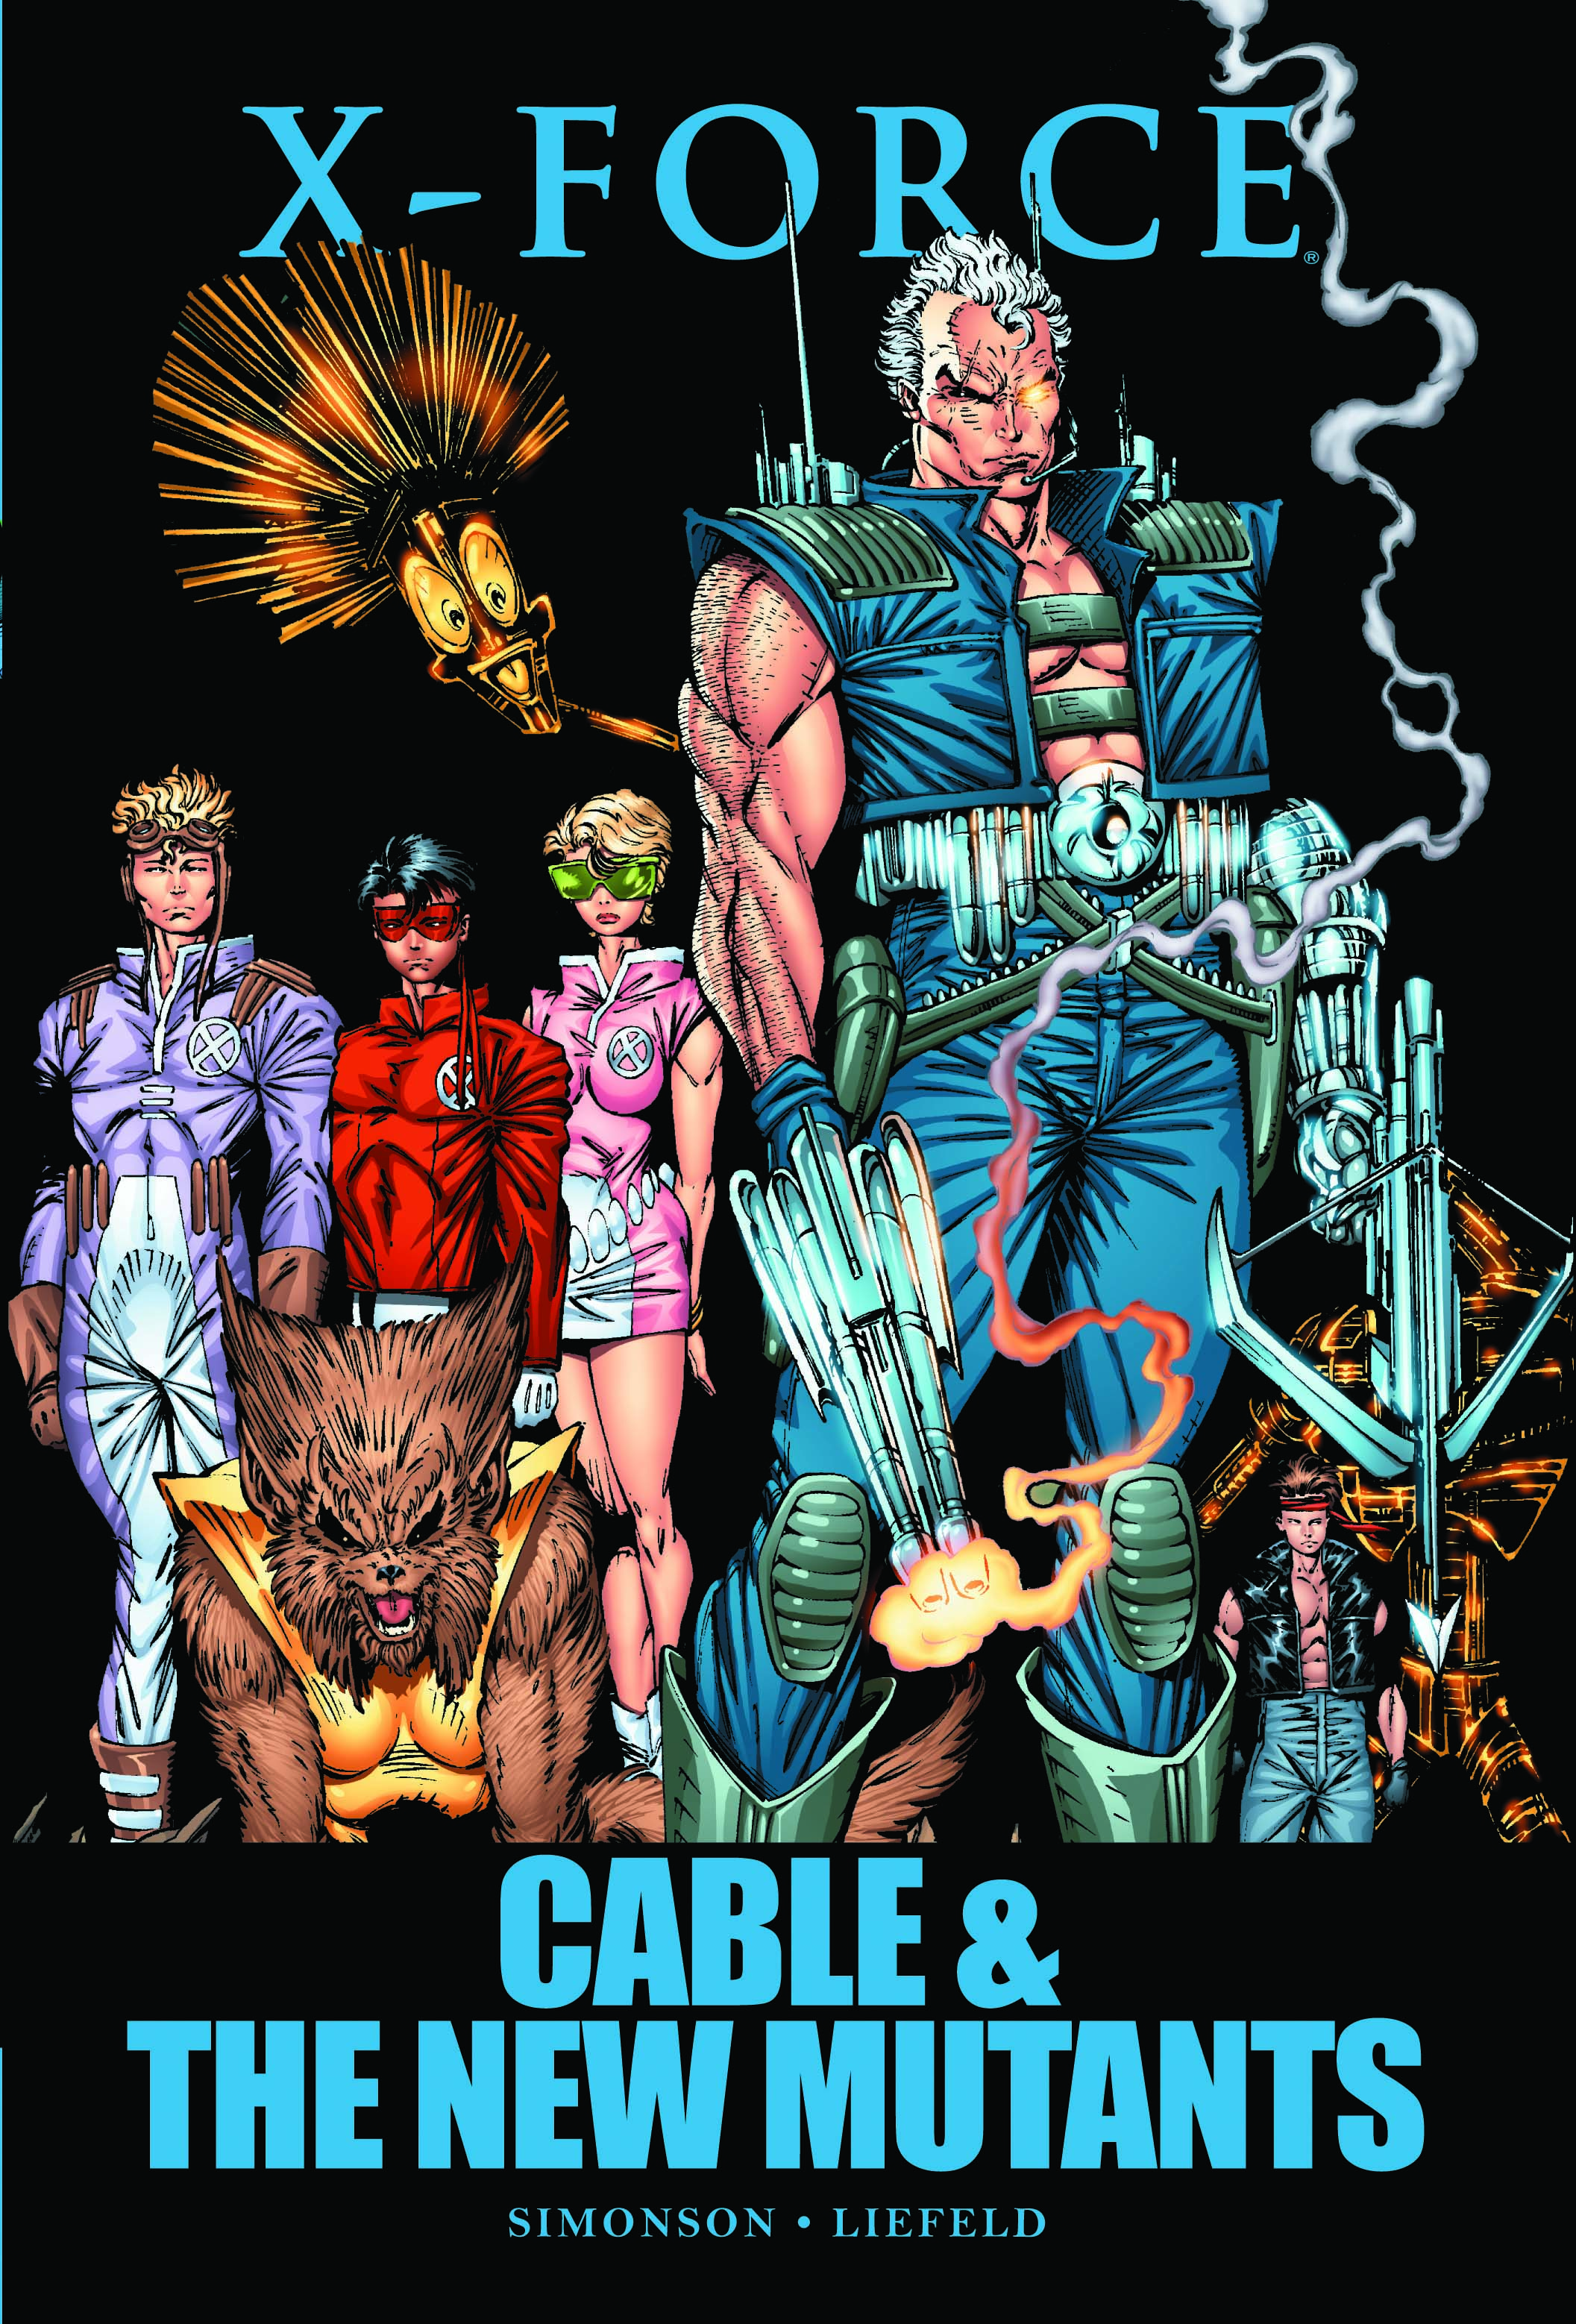 X-Force: Cable & the New Mutants (Trade Paperback)